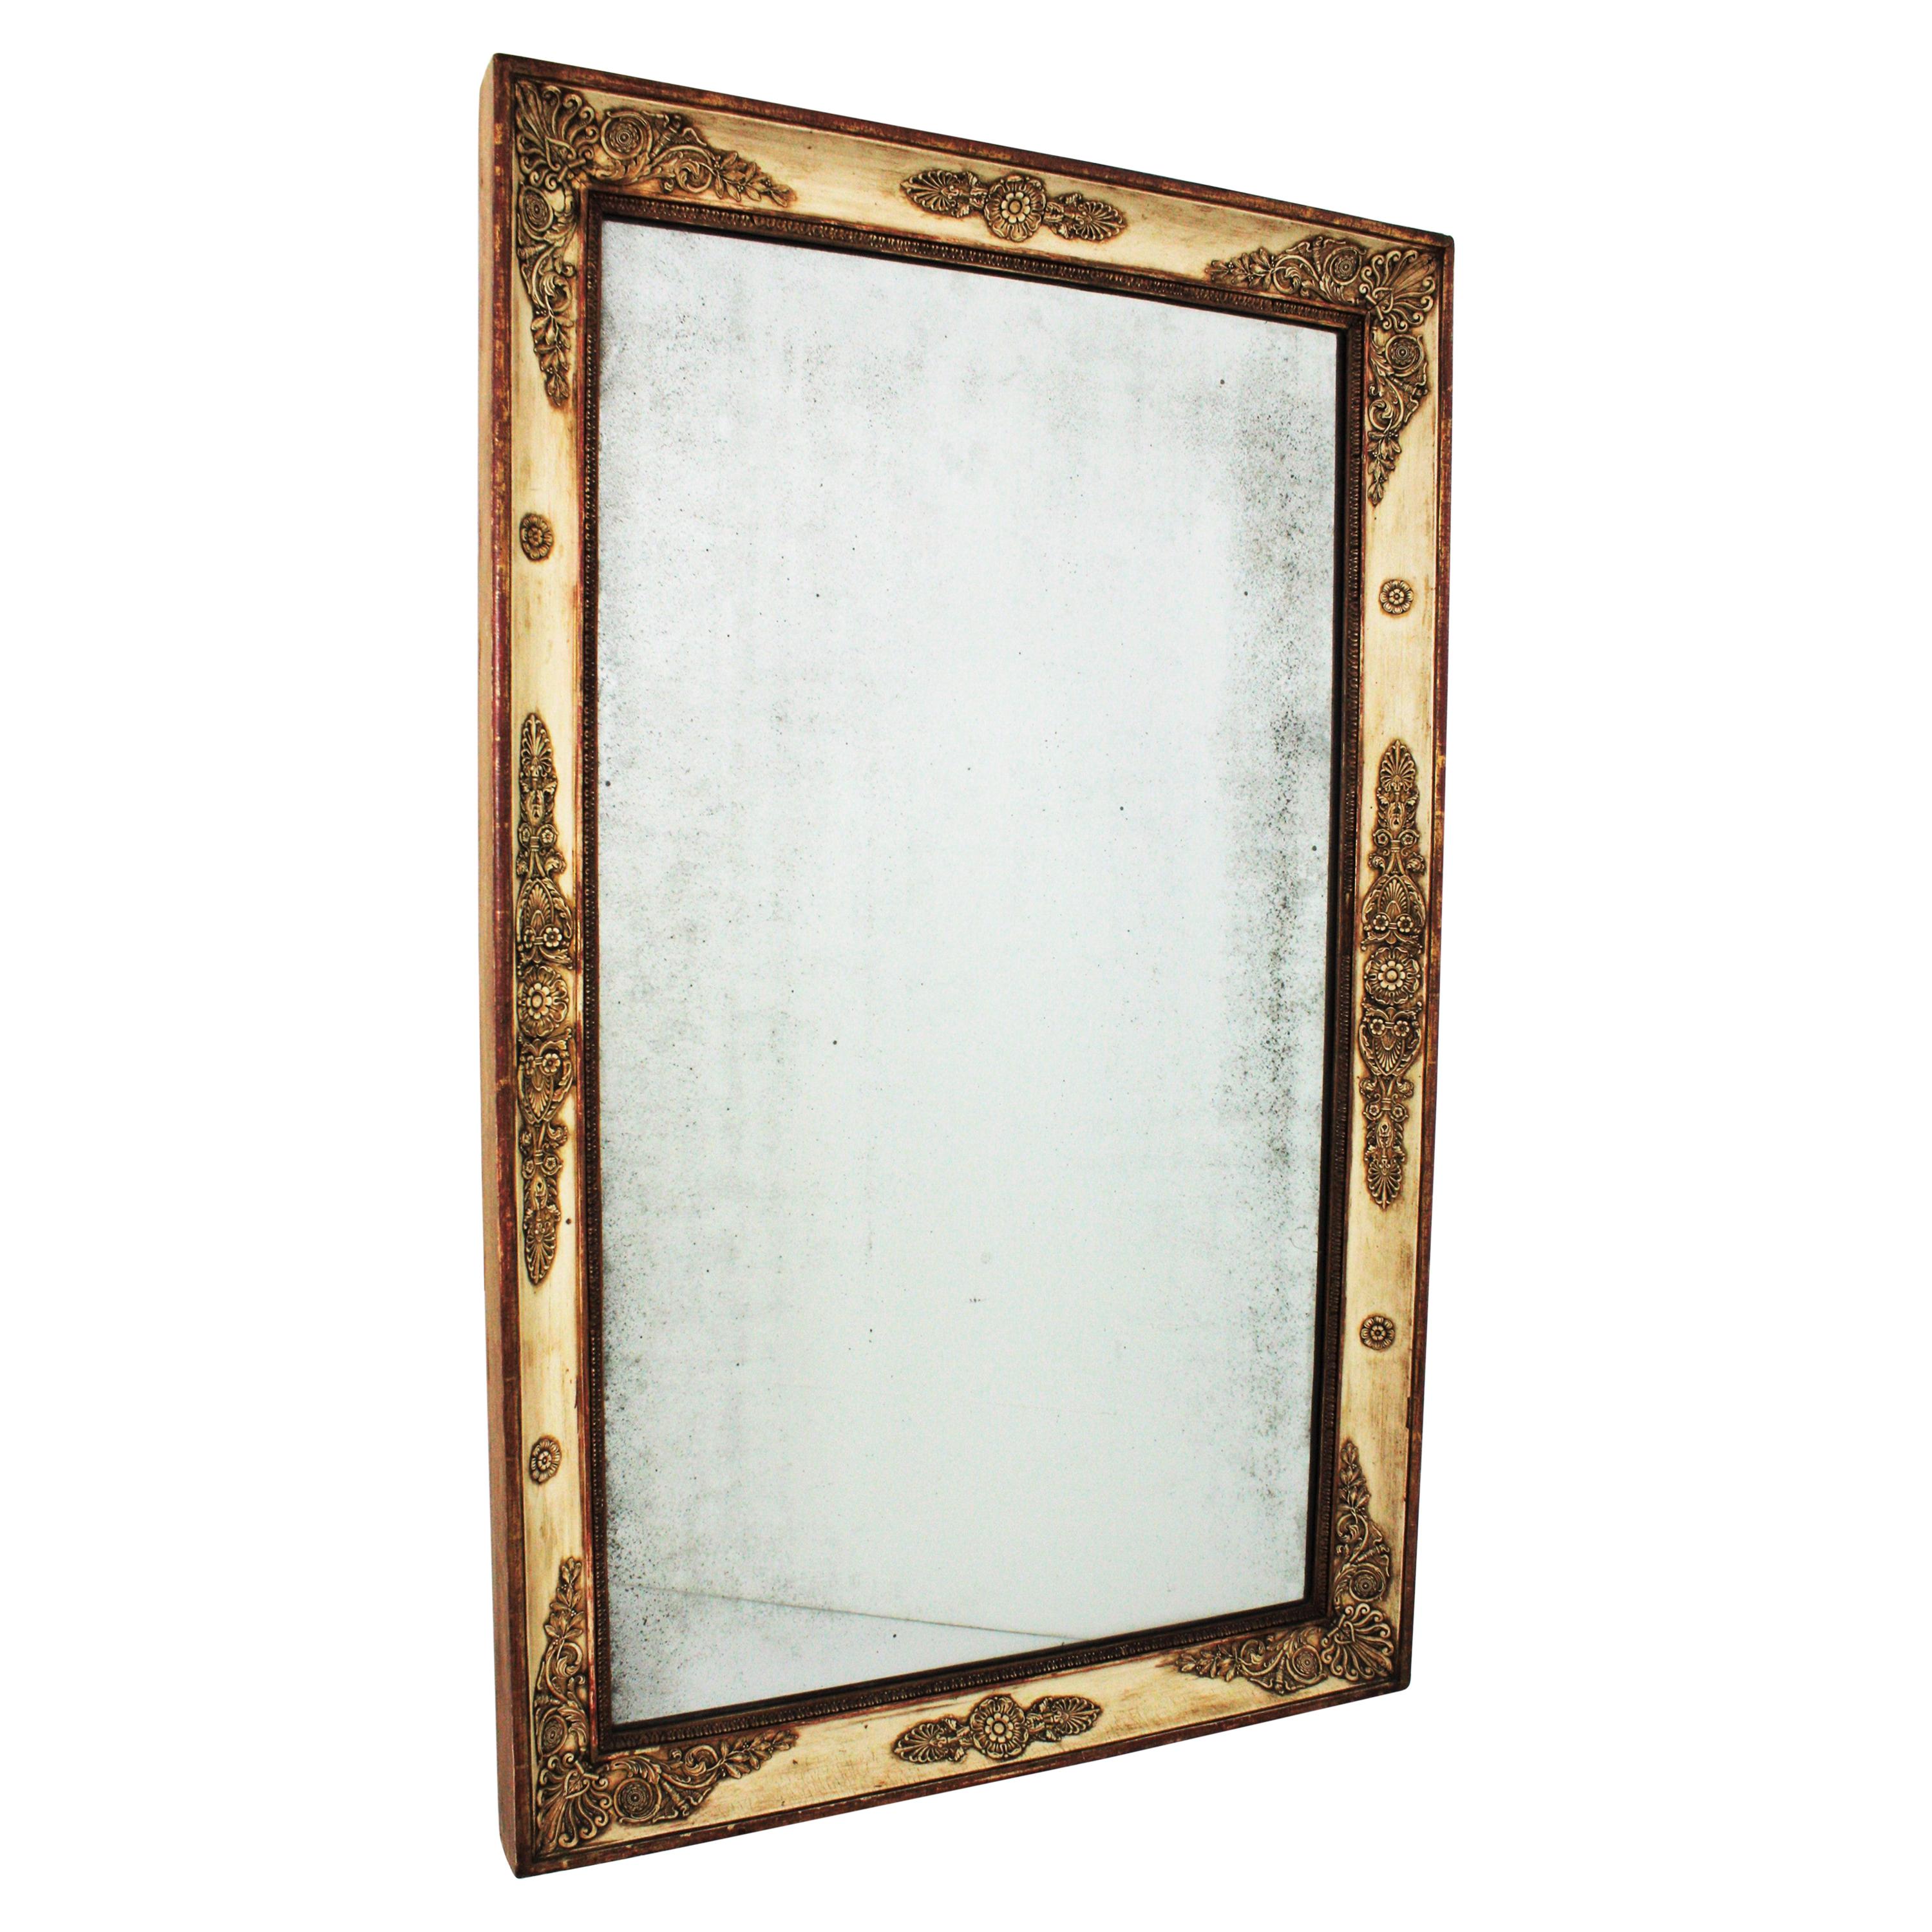 Large French Empire Parcel-Gilt and Beige Rectangular Mirror